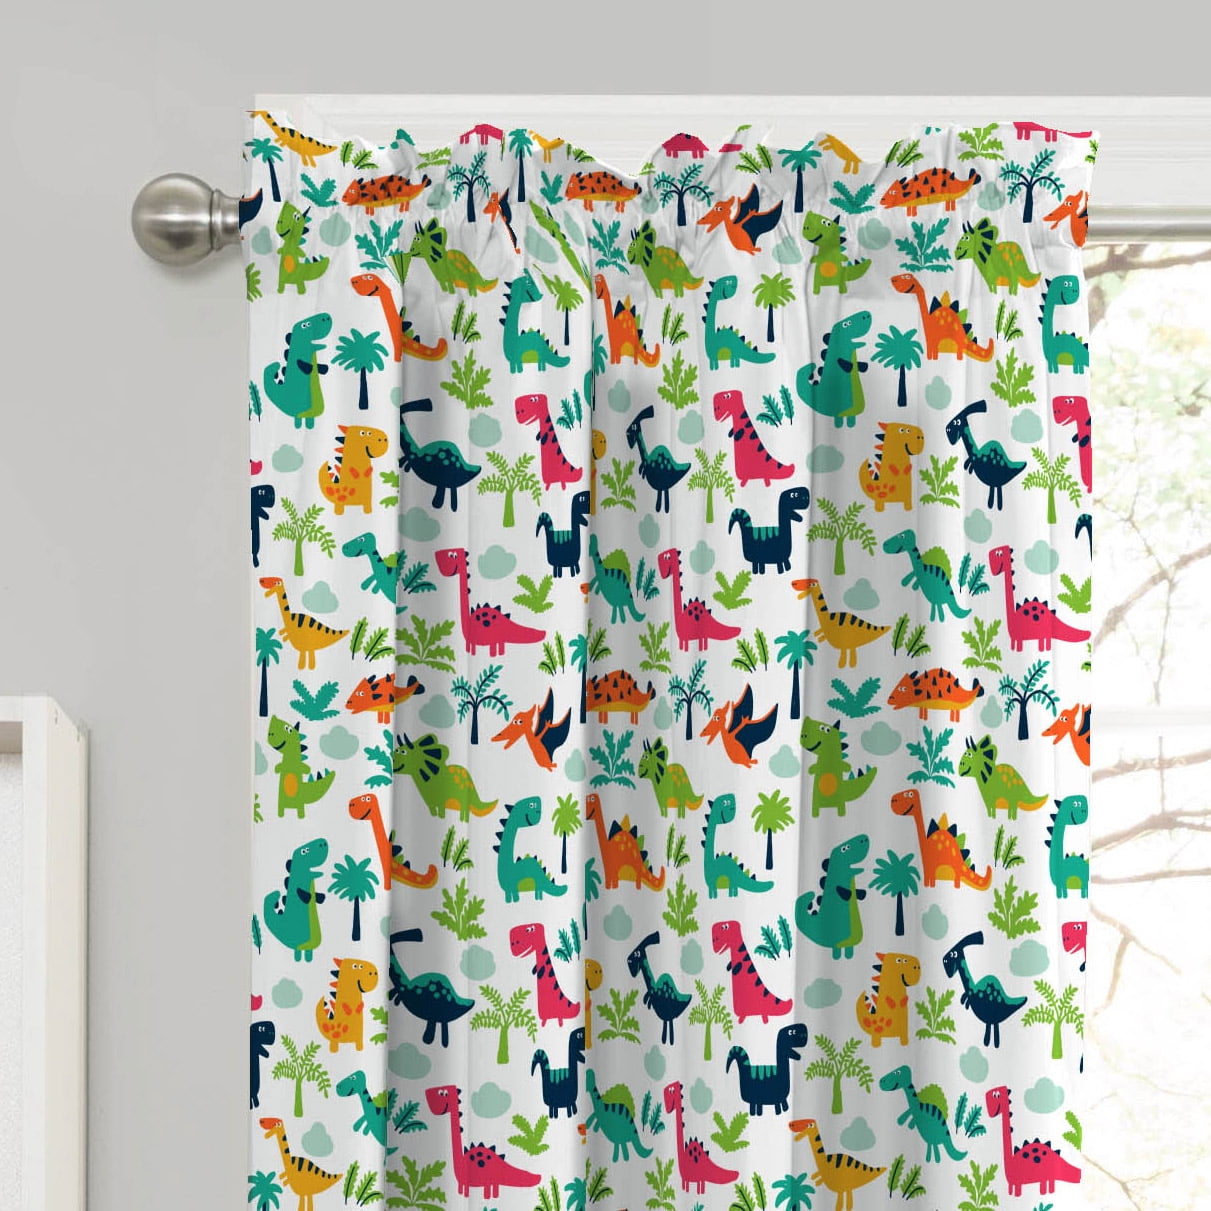 CHILDRENS WINDOW DRAPES DINOSAUR PRINT NEW BLUE/GREEN 38x84 and 55x18 in 